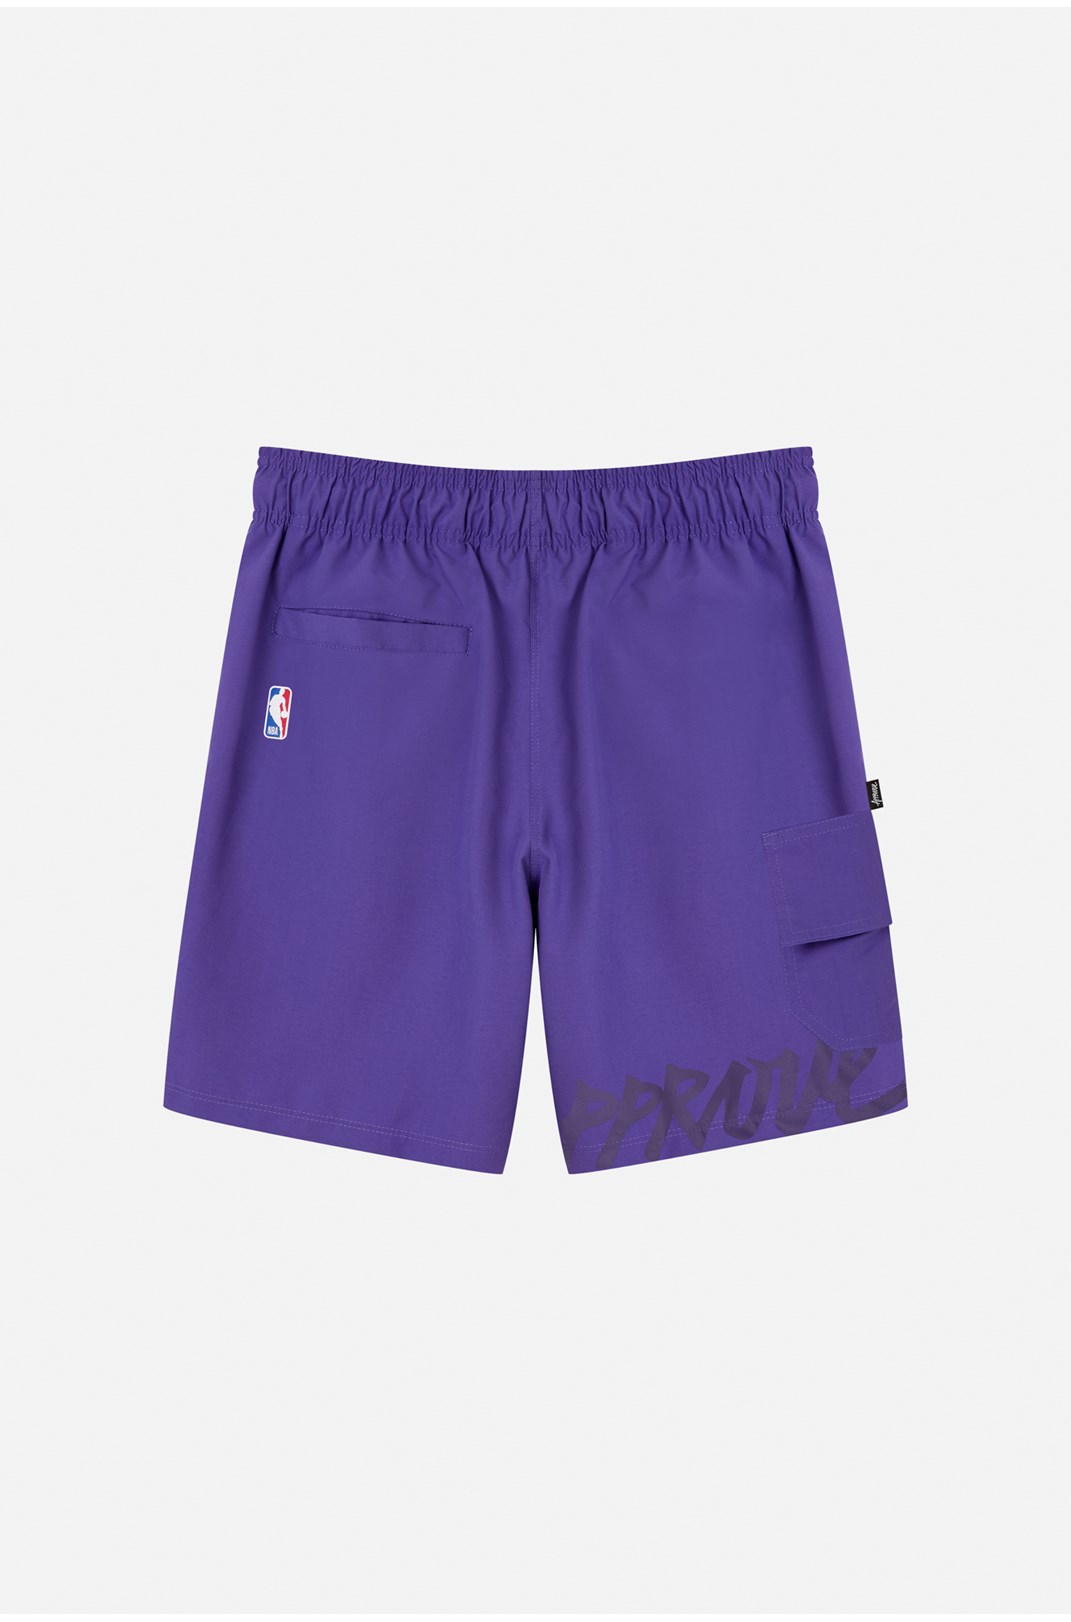 SHORTS APPROVE CHANGE THE PLANET SMILE ROXO - Roxo